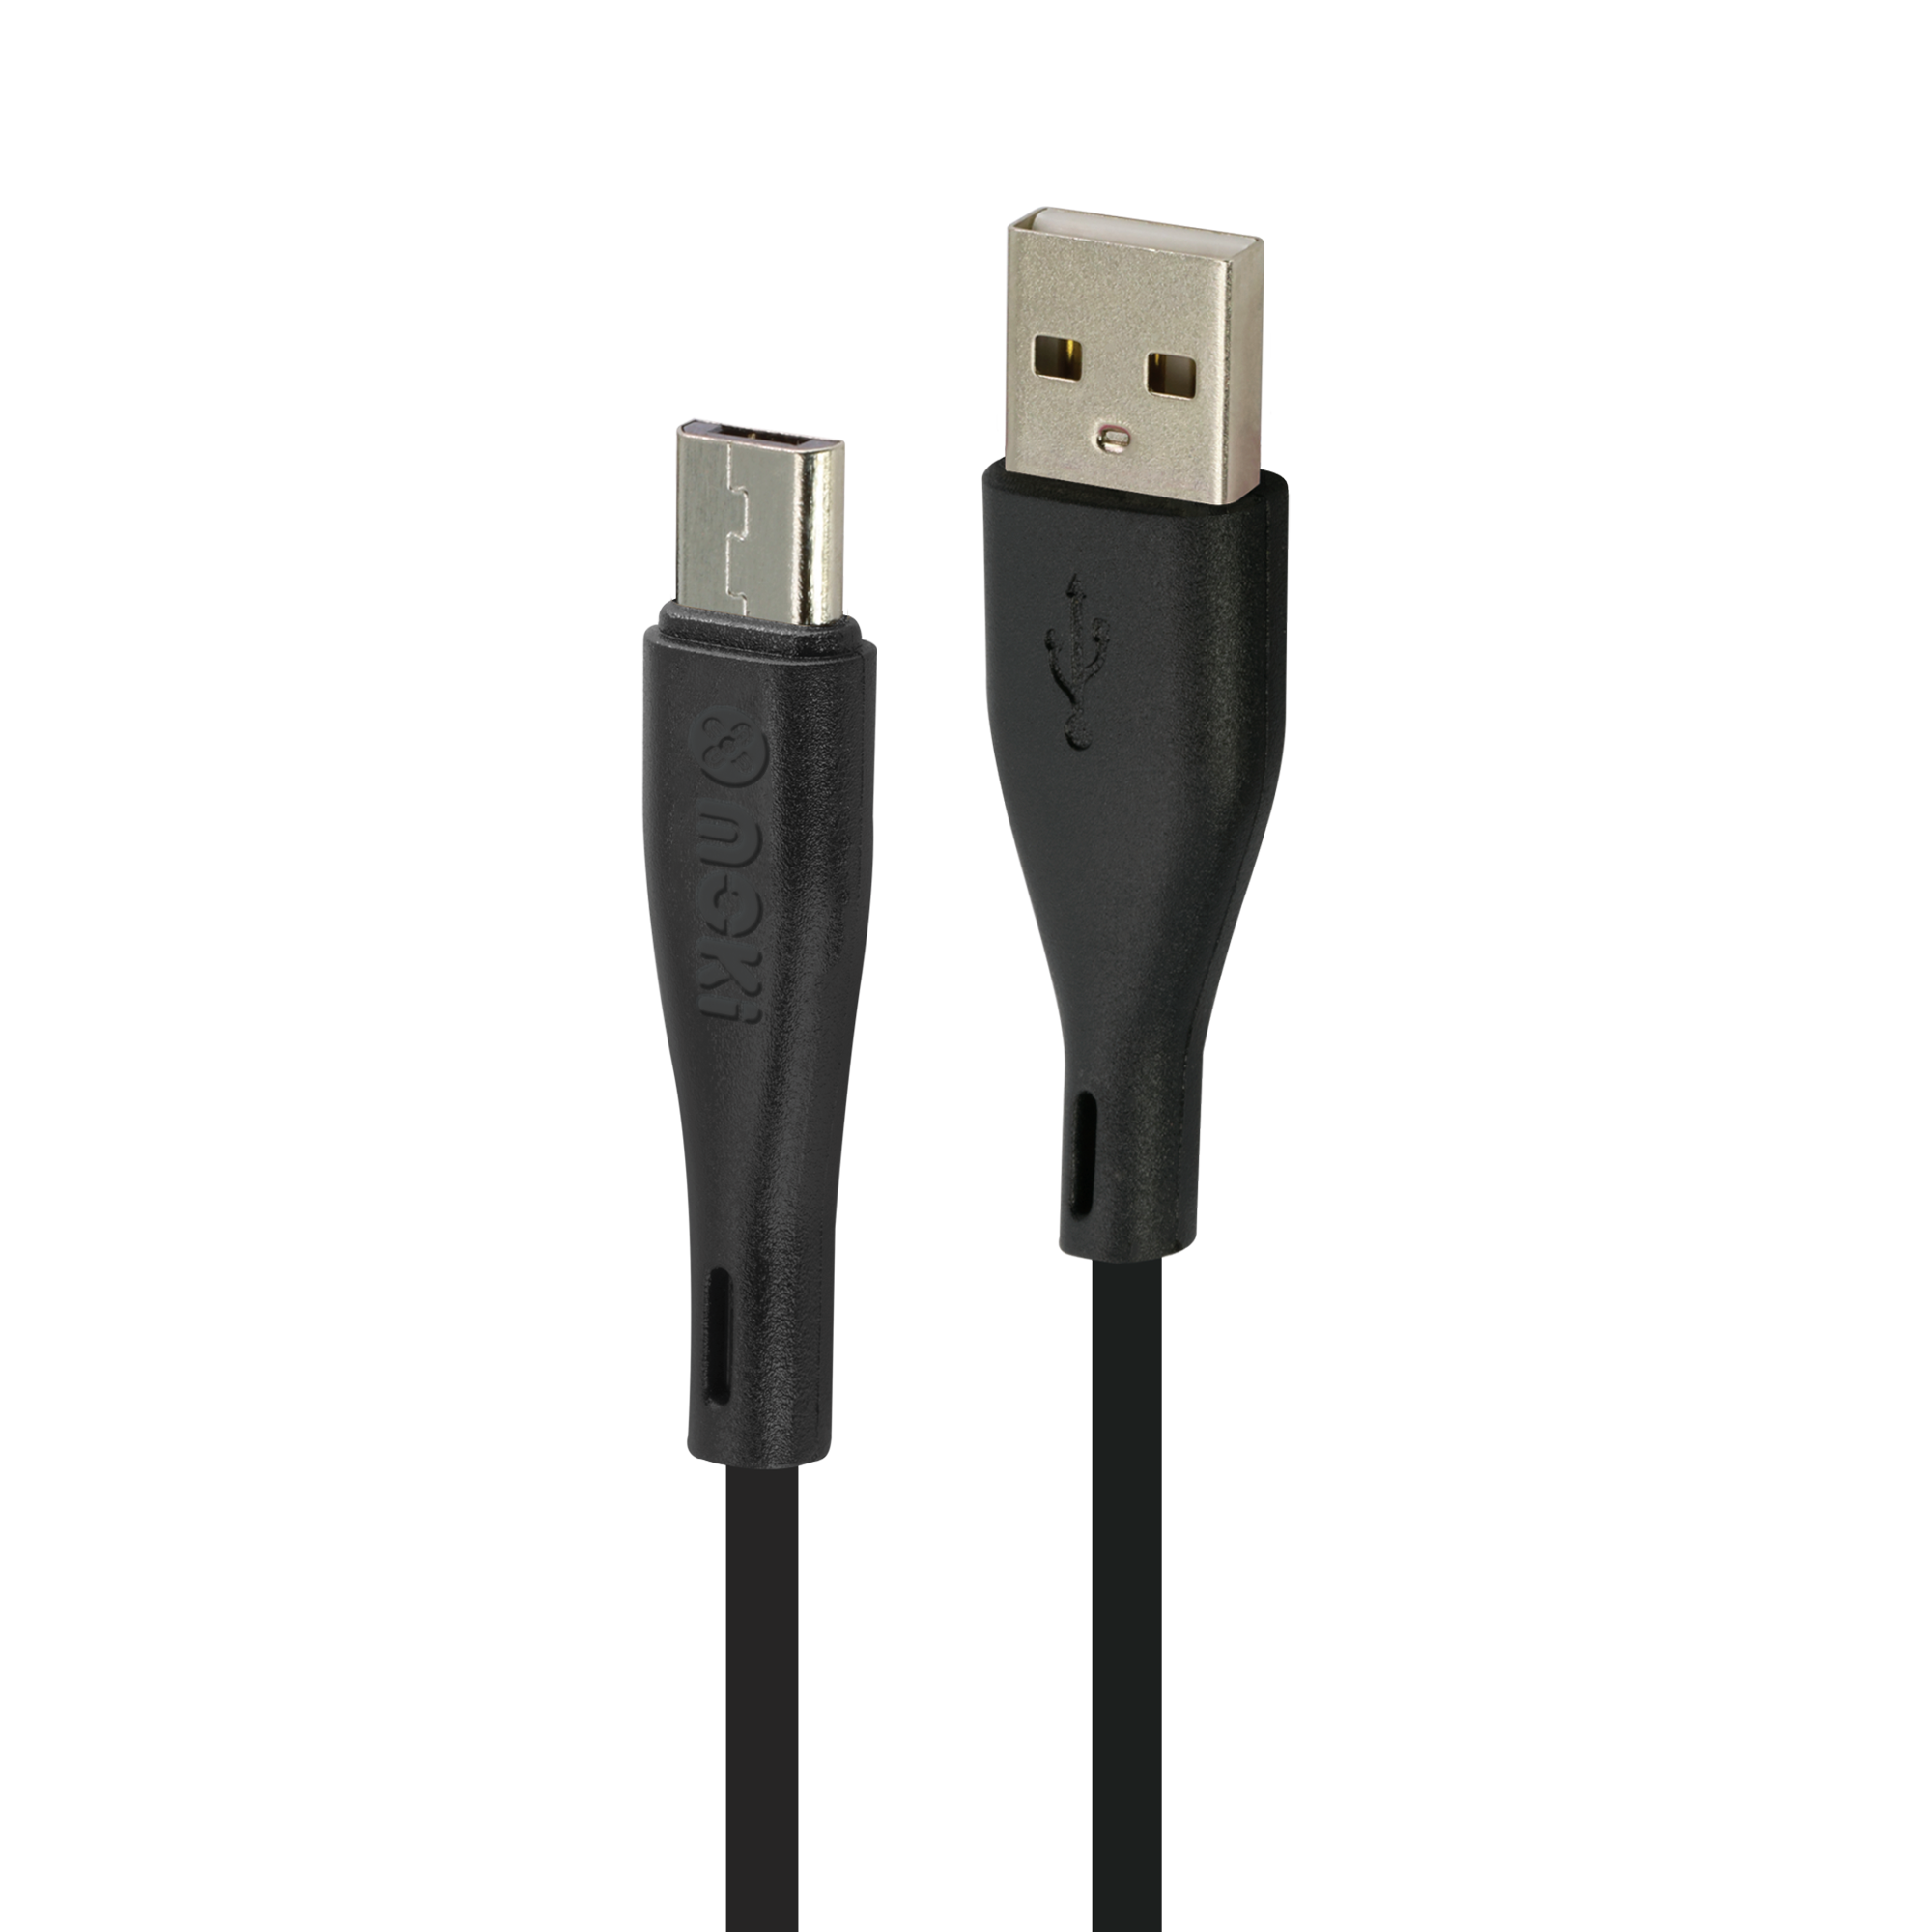 MicroUSB to USB-A SynCharge Cable